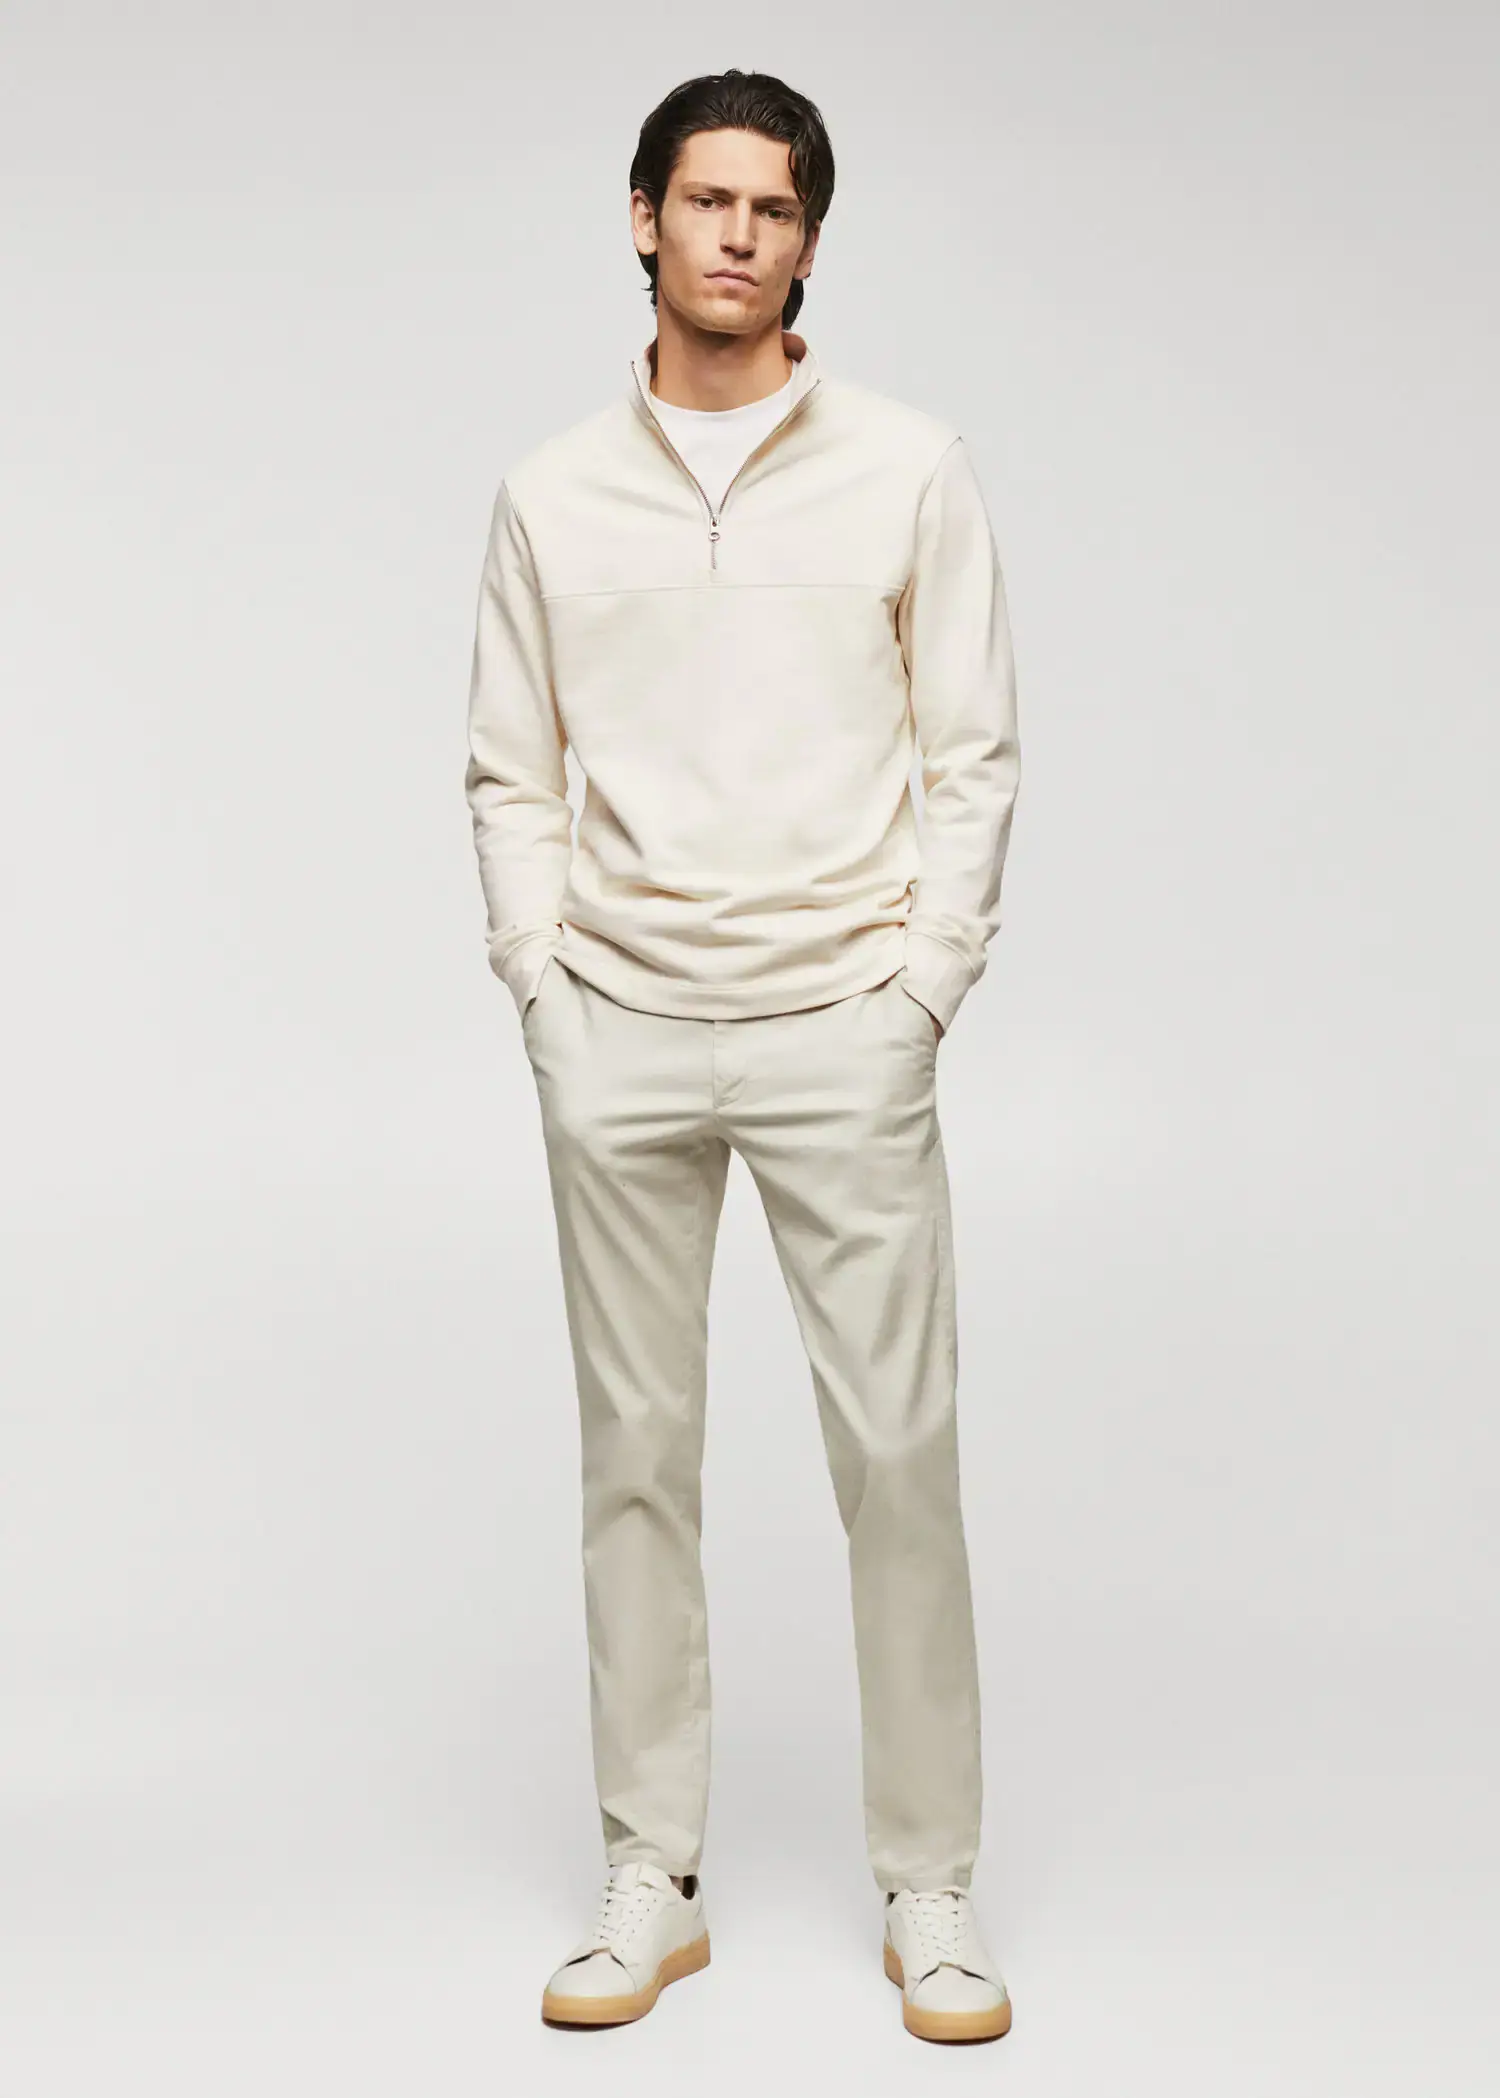 Mango Cotton sweatshirt with zip neck. a man standing in front of a white wall. 